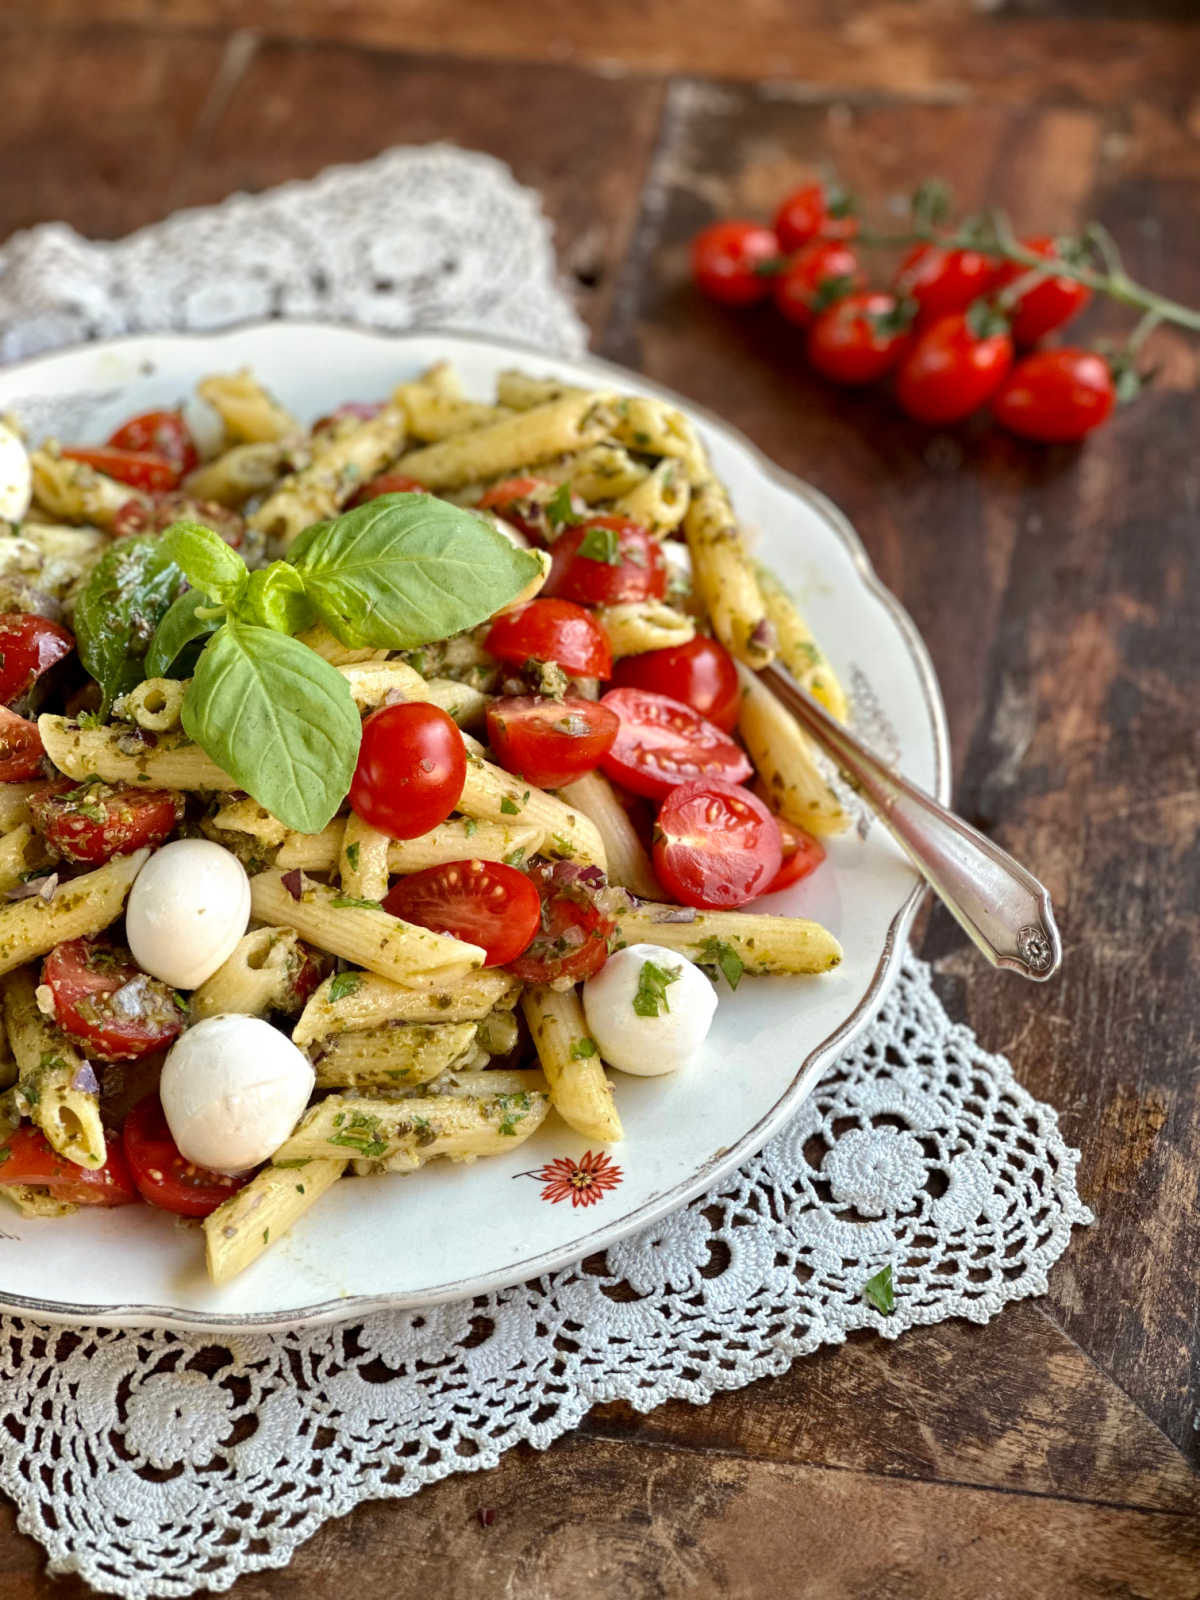 Looking across a plate of pesto penne salad topped with halved cherry tomatoes, mozzarella pearls, and fresh basil, ready to eat.